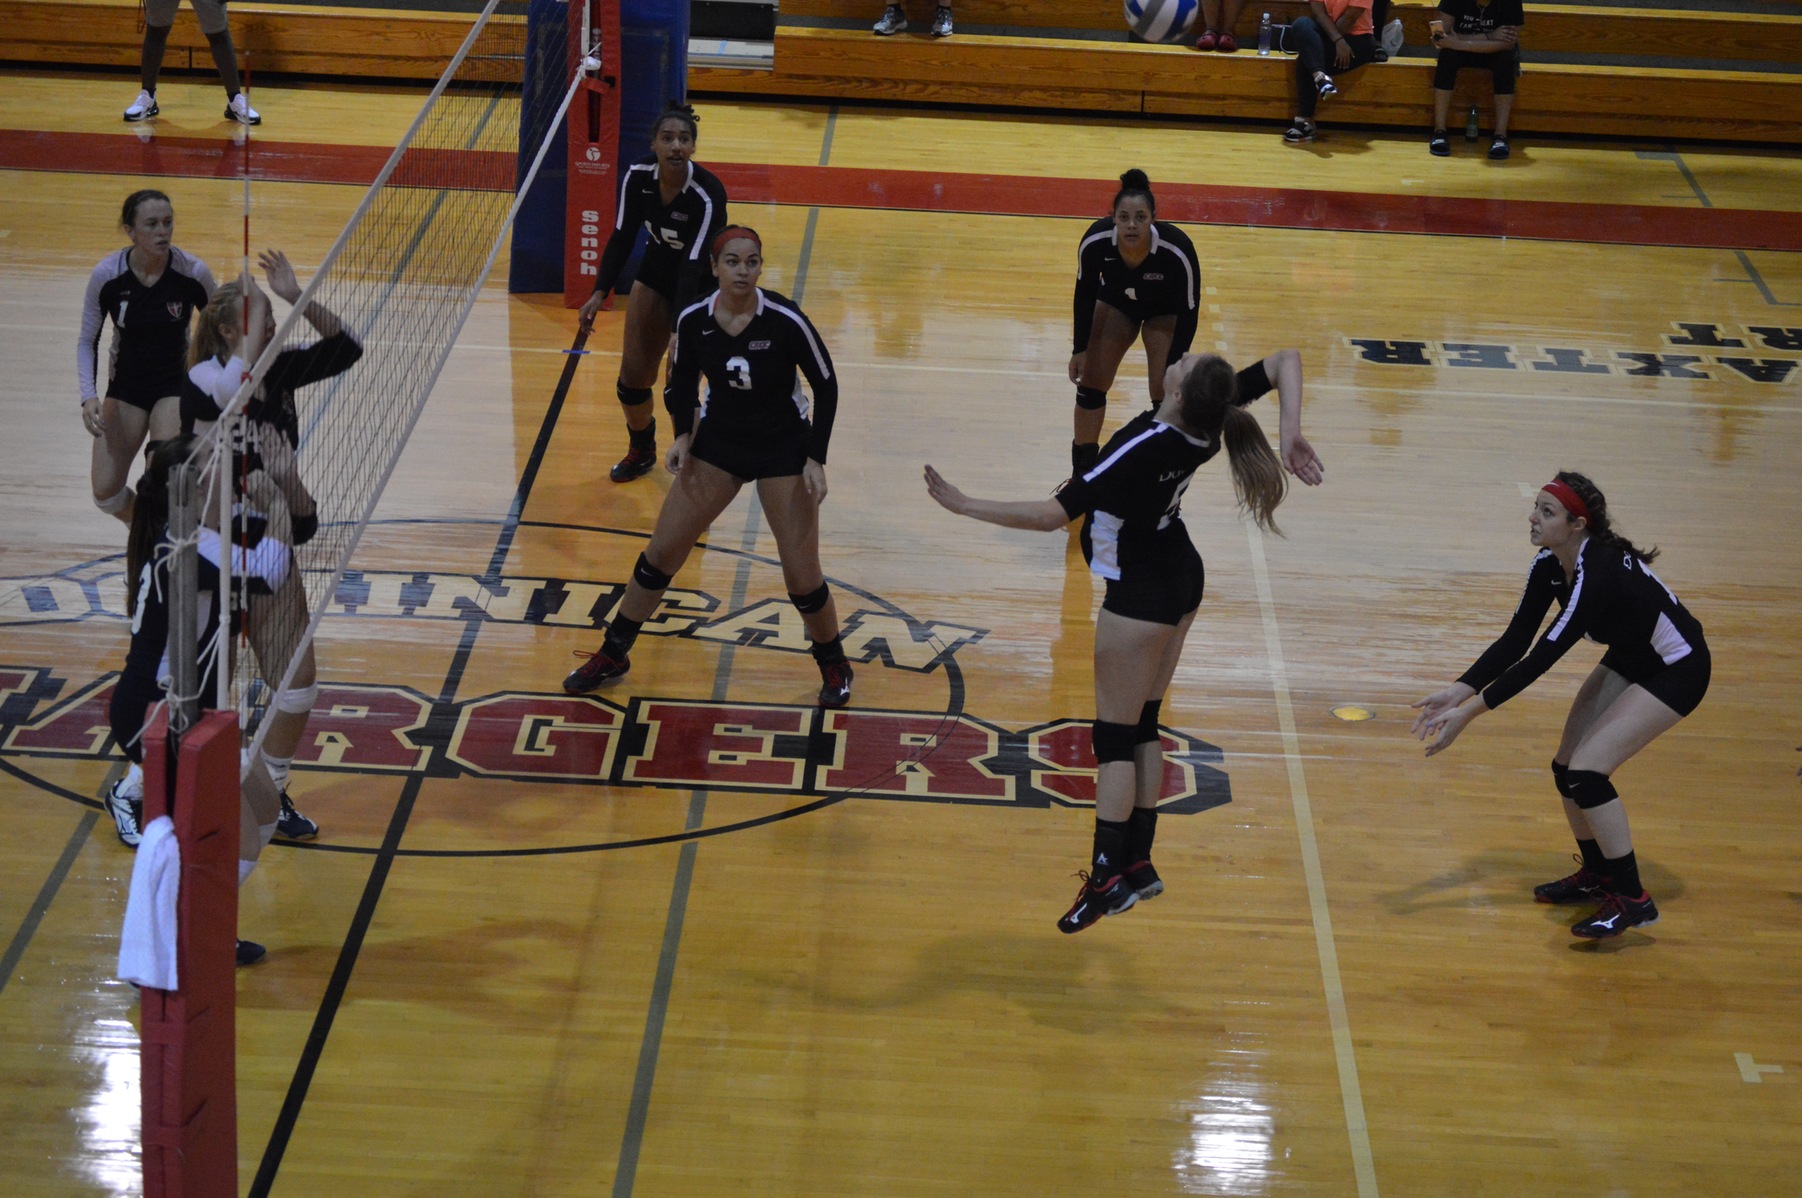 WOMEN'S VOLLEYBALL FALLS TO HOLY FAMILY